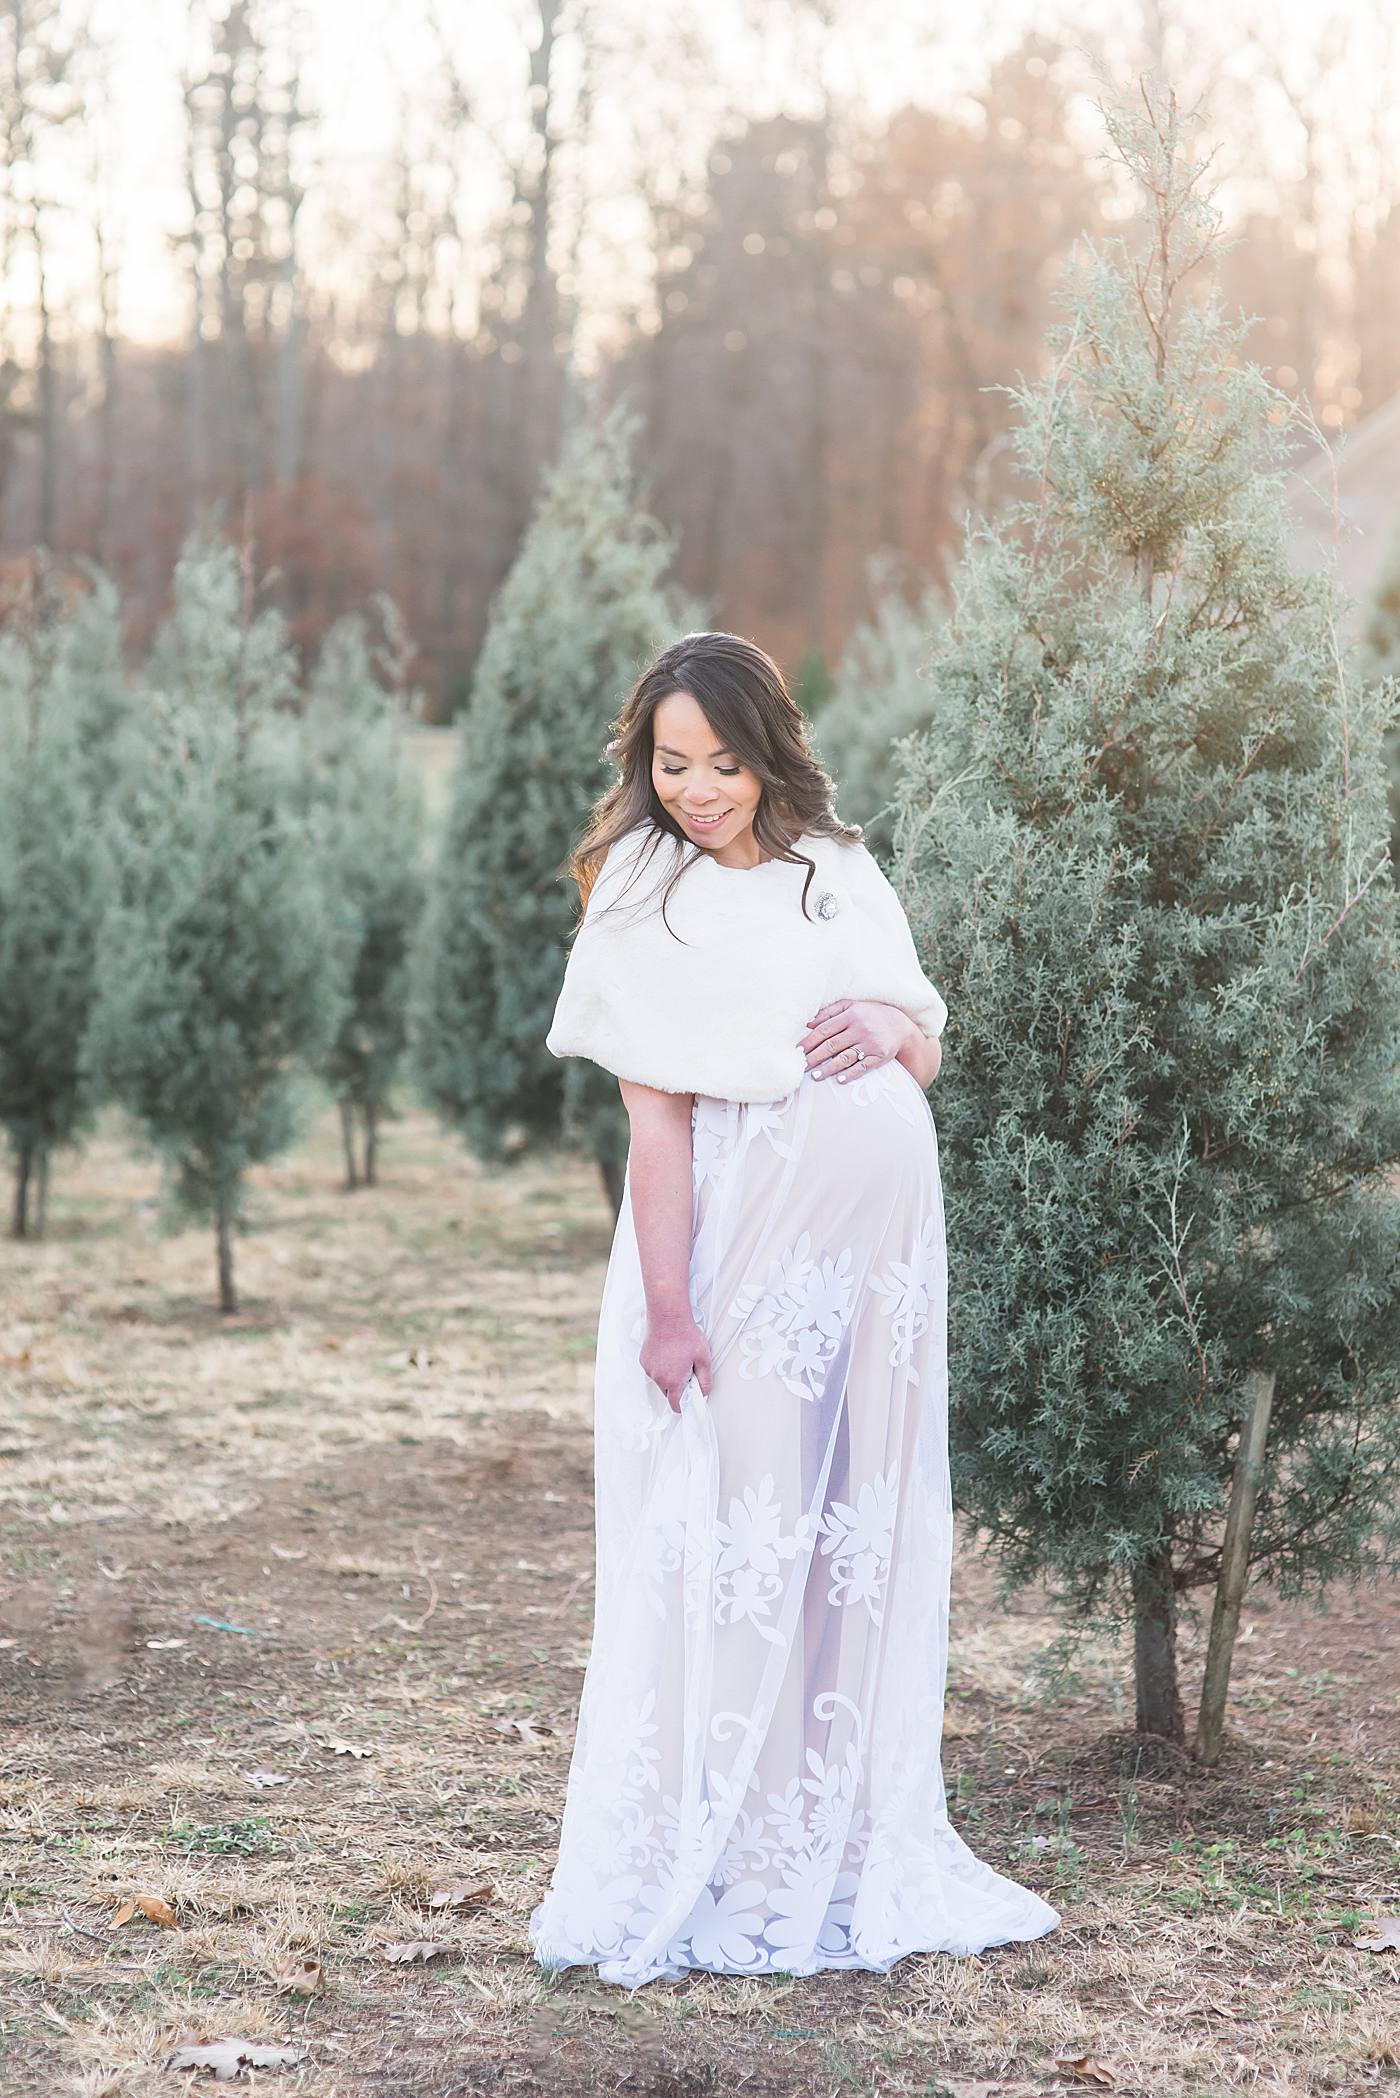 Mom to be in at a tree farm | Photo by Anna Wisjo Photography